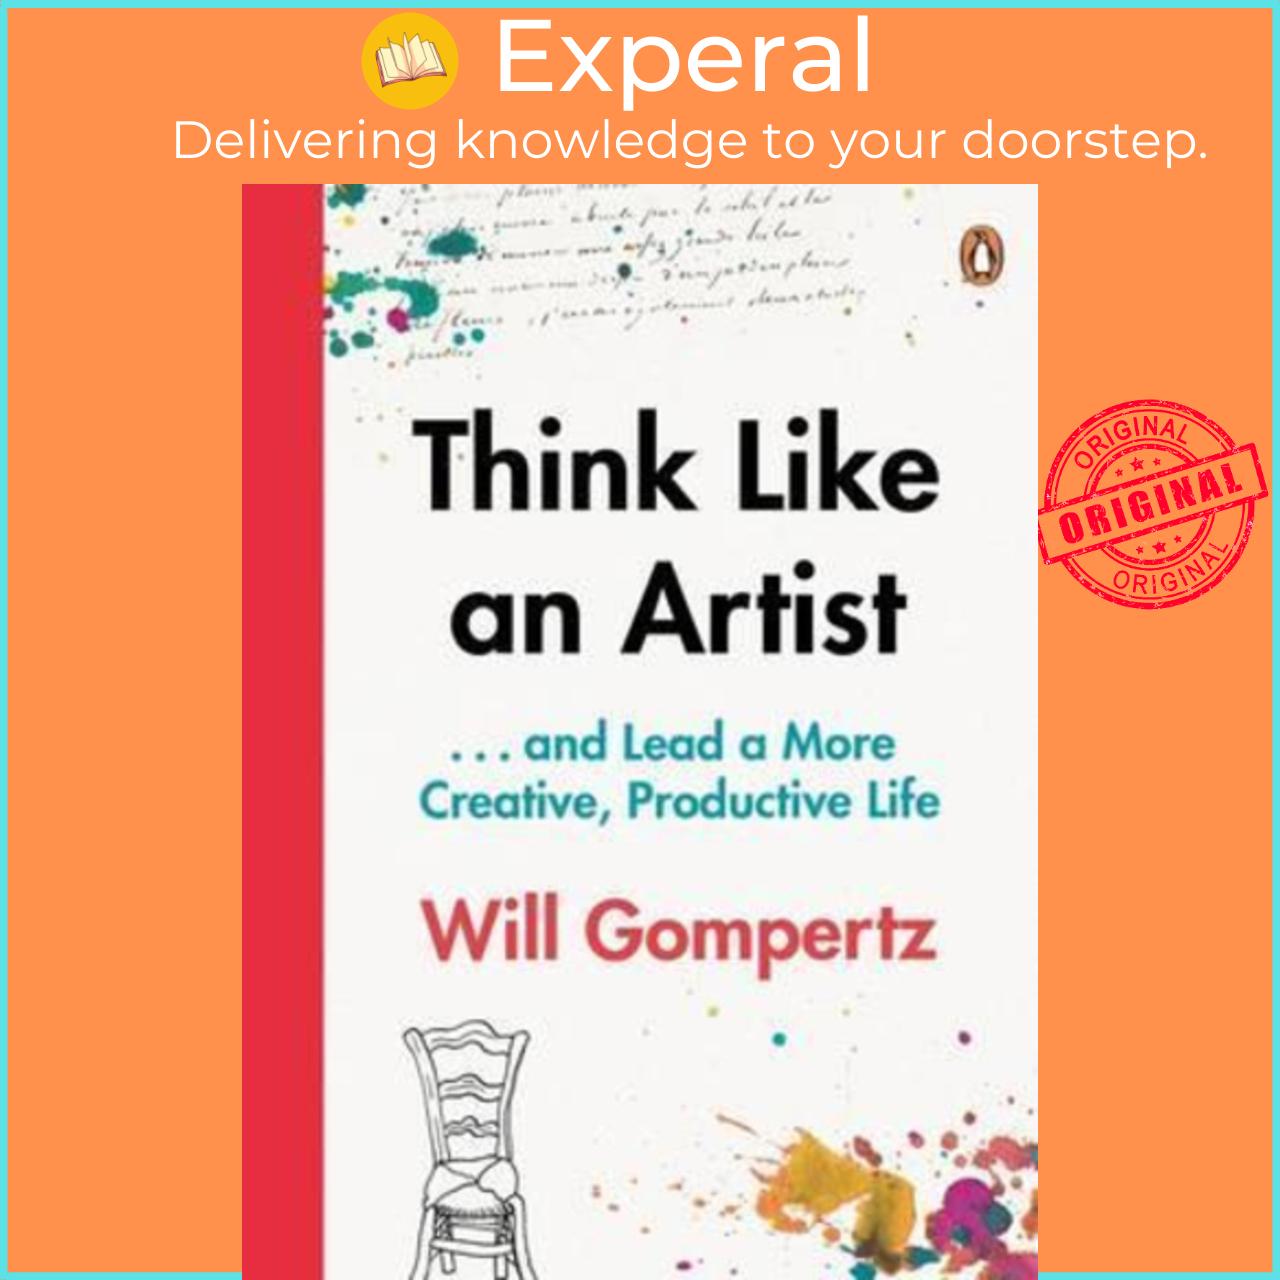 Sách - Think Like an Artist : . . . and Lead a More Creative, Productive Life by Will Gompertz (UK edition, paperback)